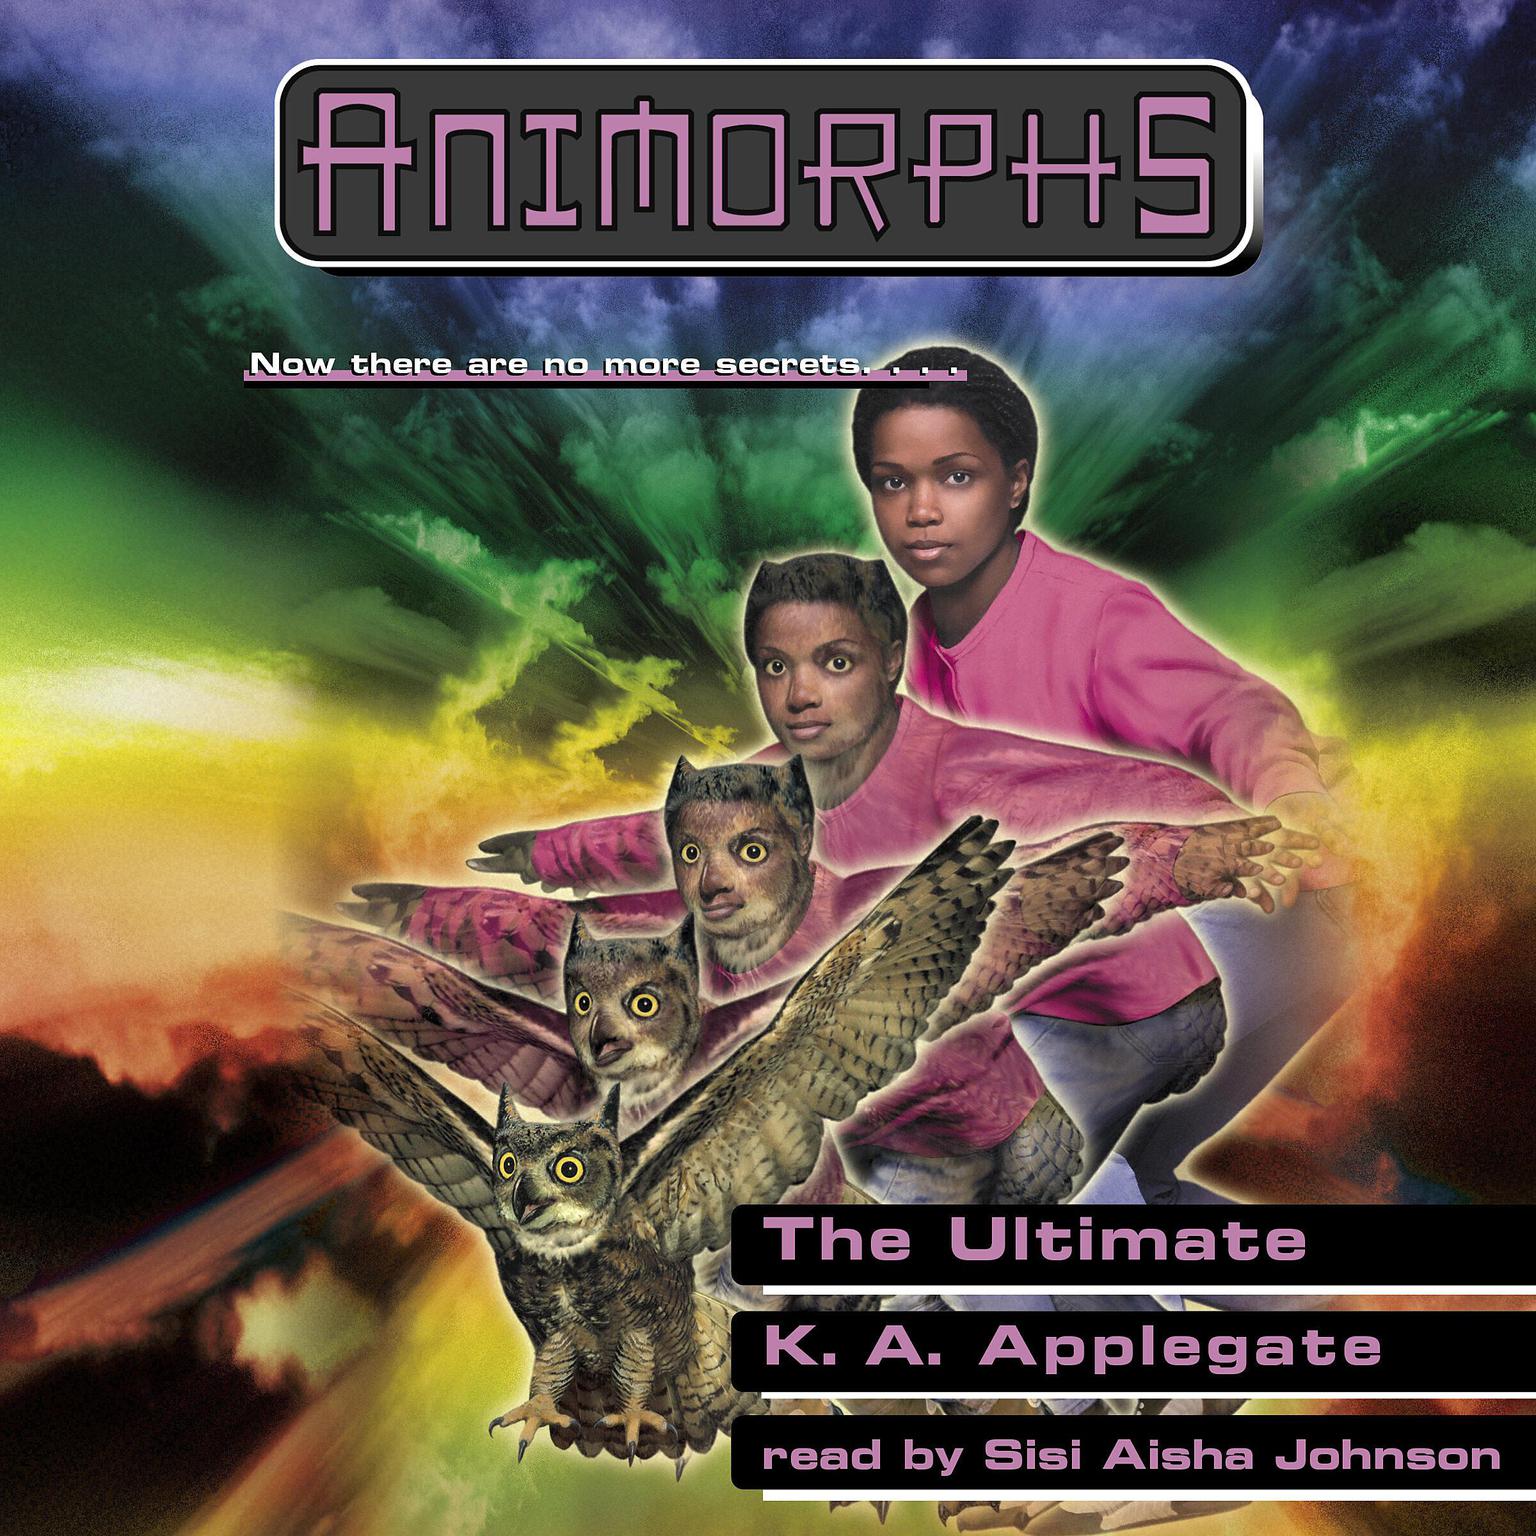 The Ultimate (Animorphs #50) Audiobook, by K. A. Applegate